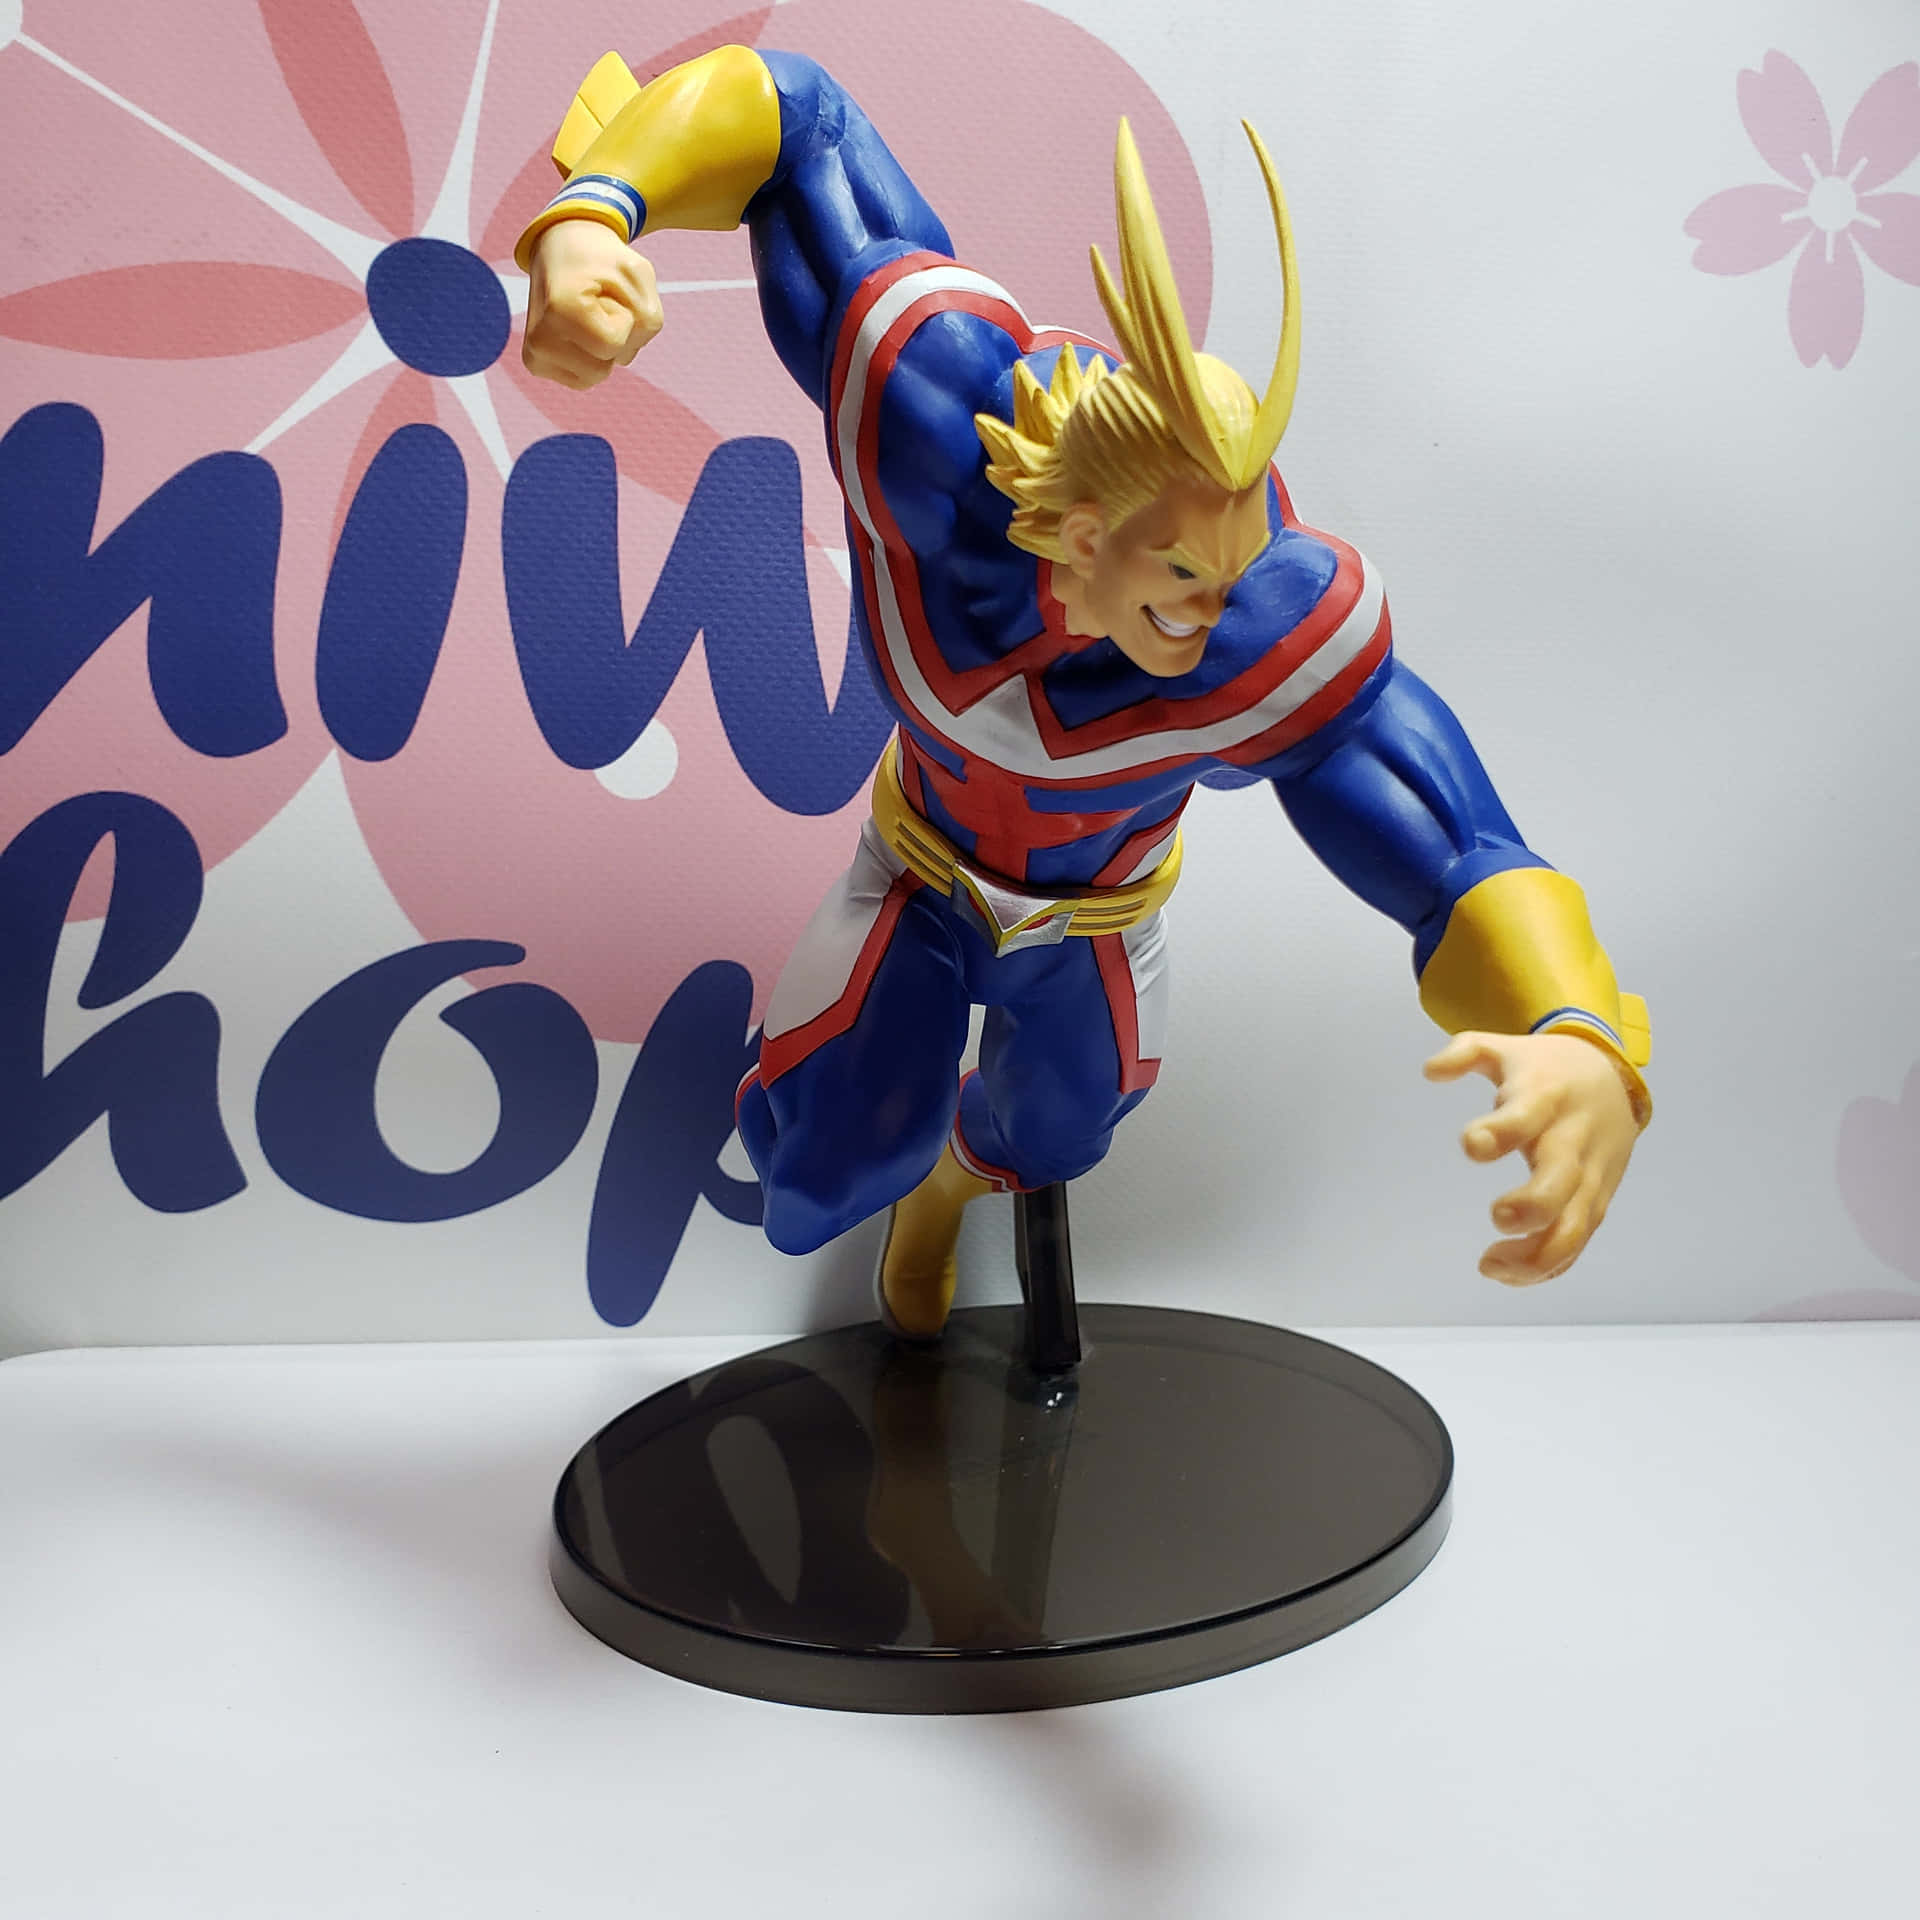 All Might stands proud for justice